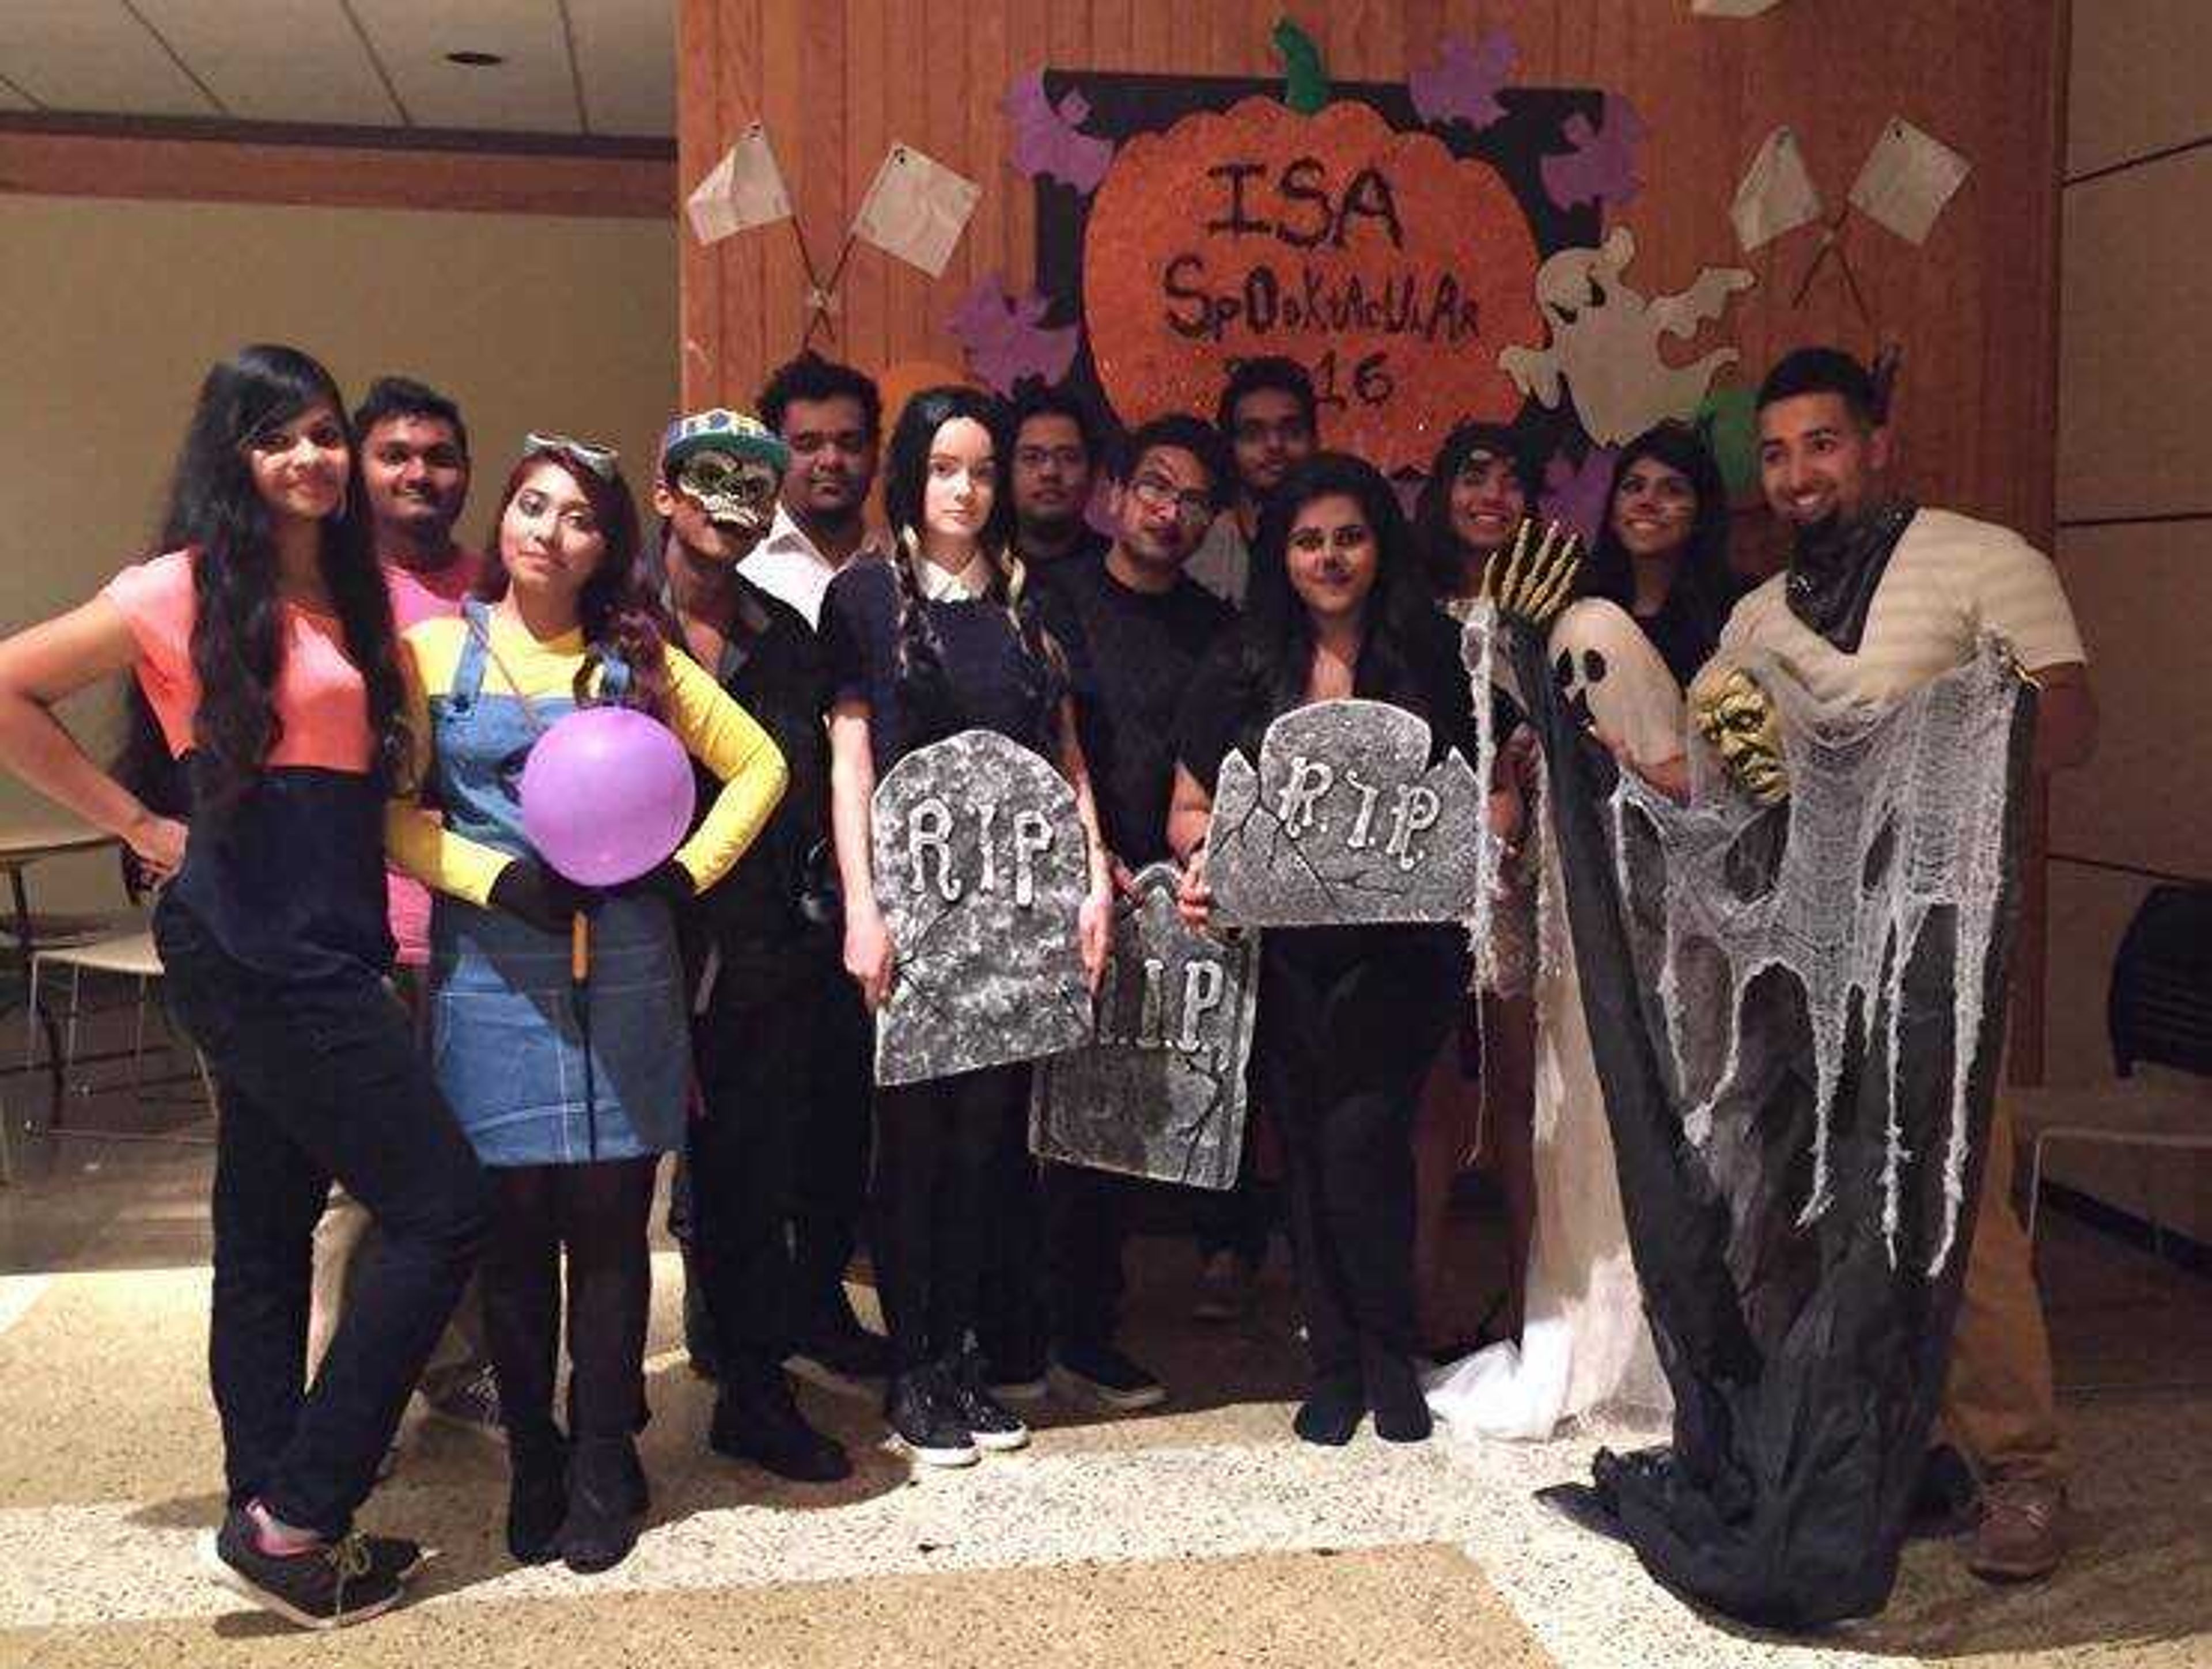 ISA Halloween Spooktacular was the first major event directed by the new executive board and committee members, pictured here. 